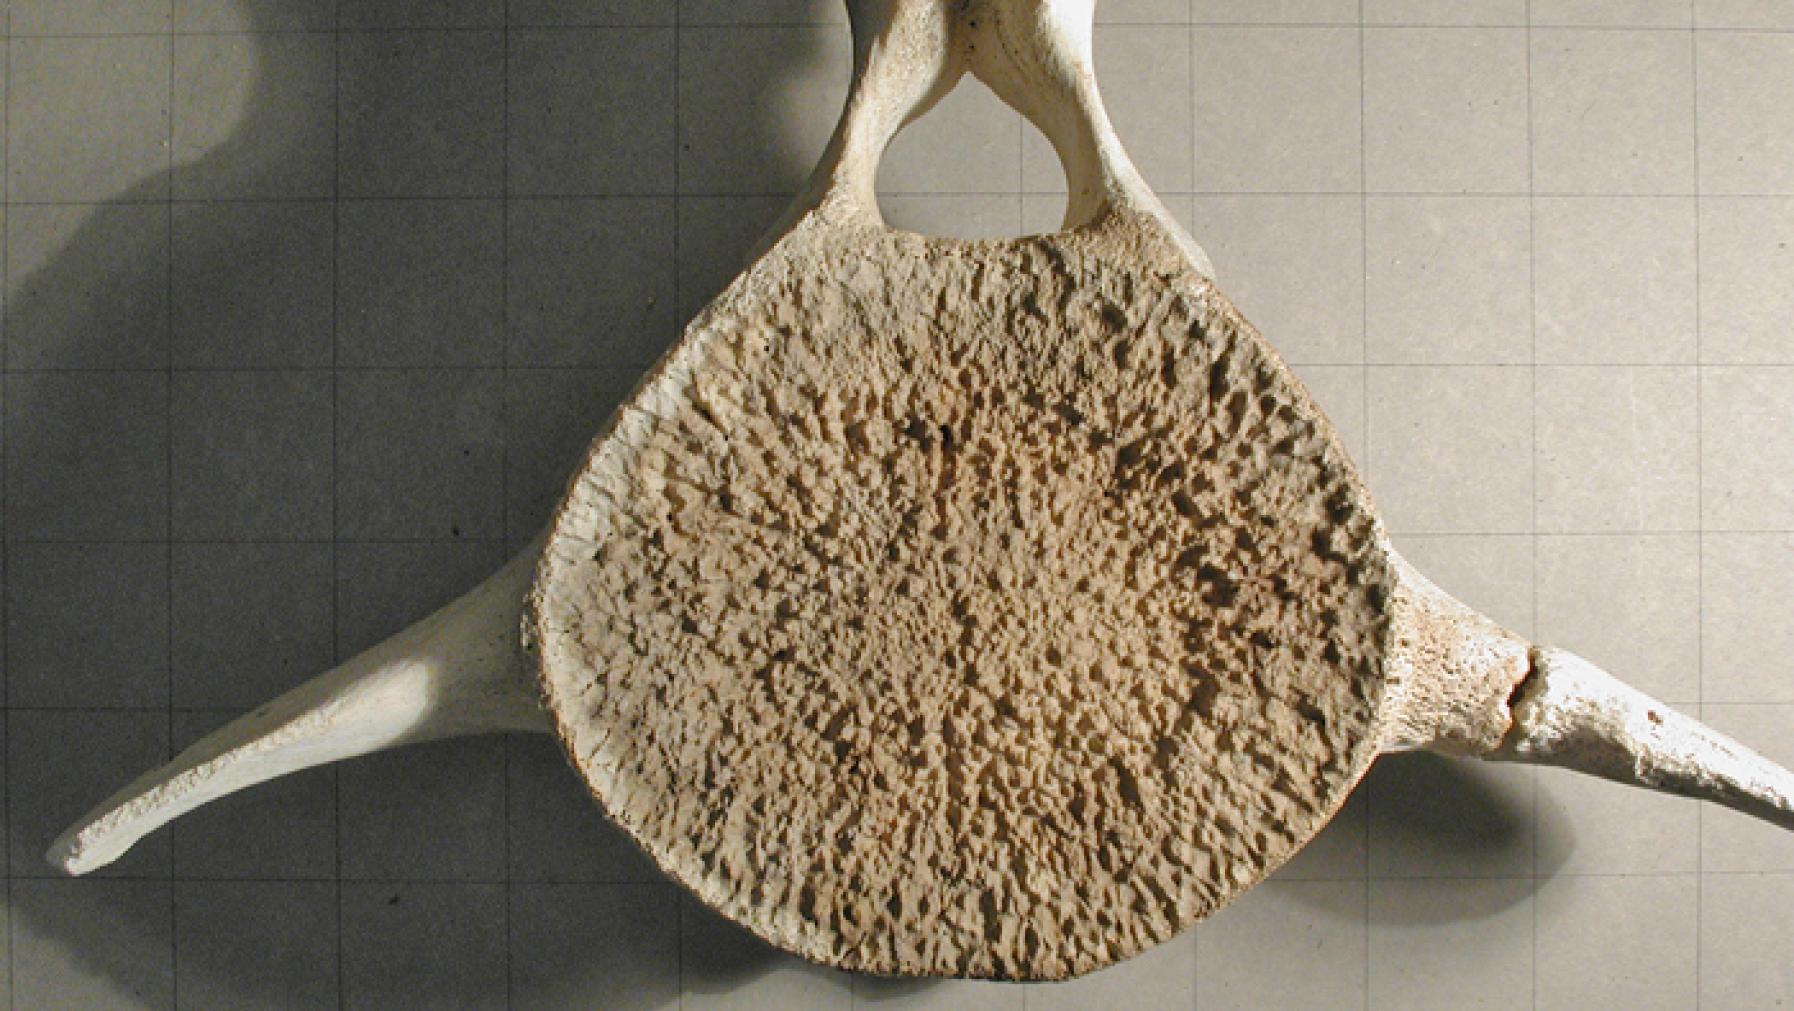 The relief of the disc and the recesses of the vertebrae fit perfectly together.